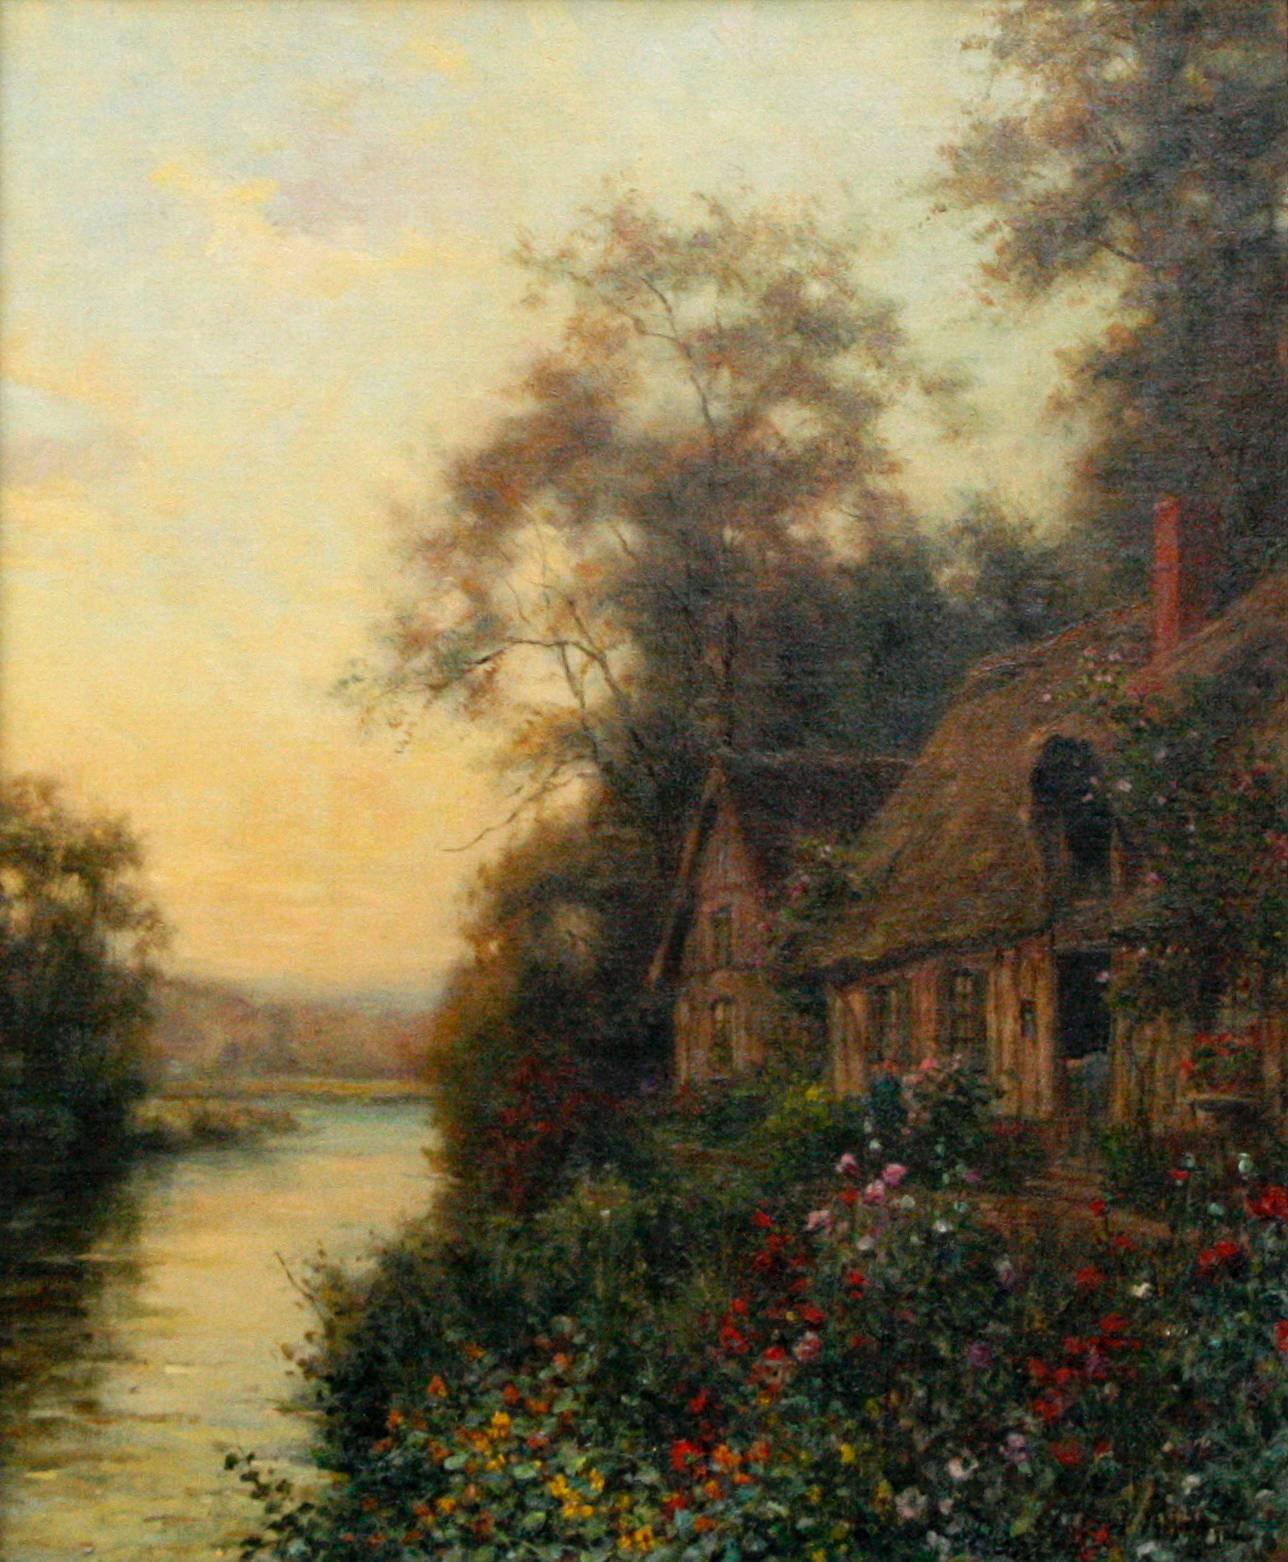 Sunset on the River - Painting by Louis Aston Knight